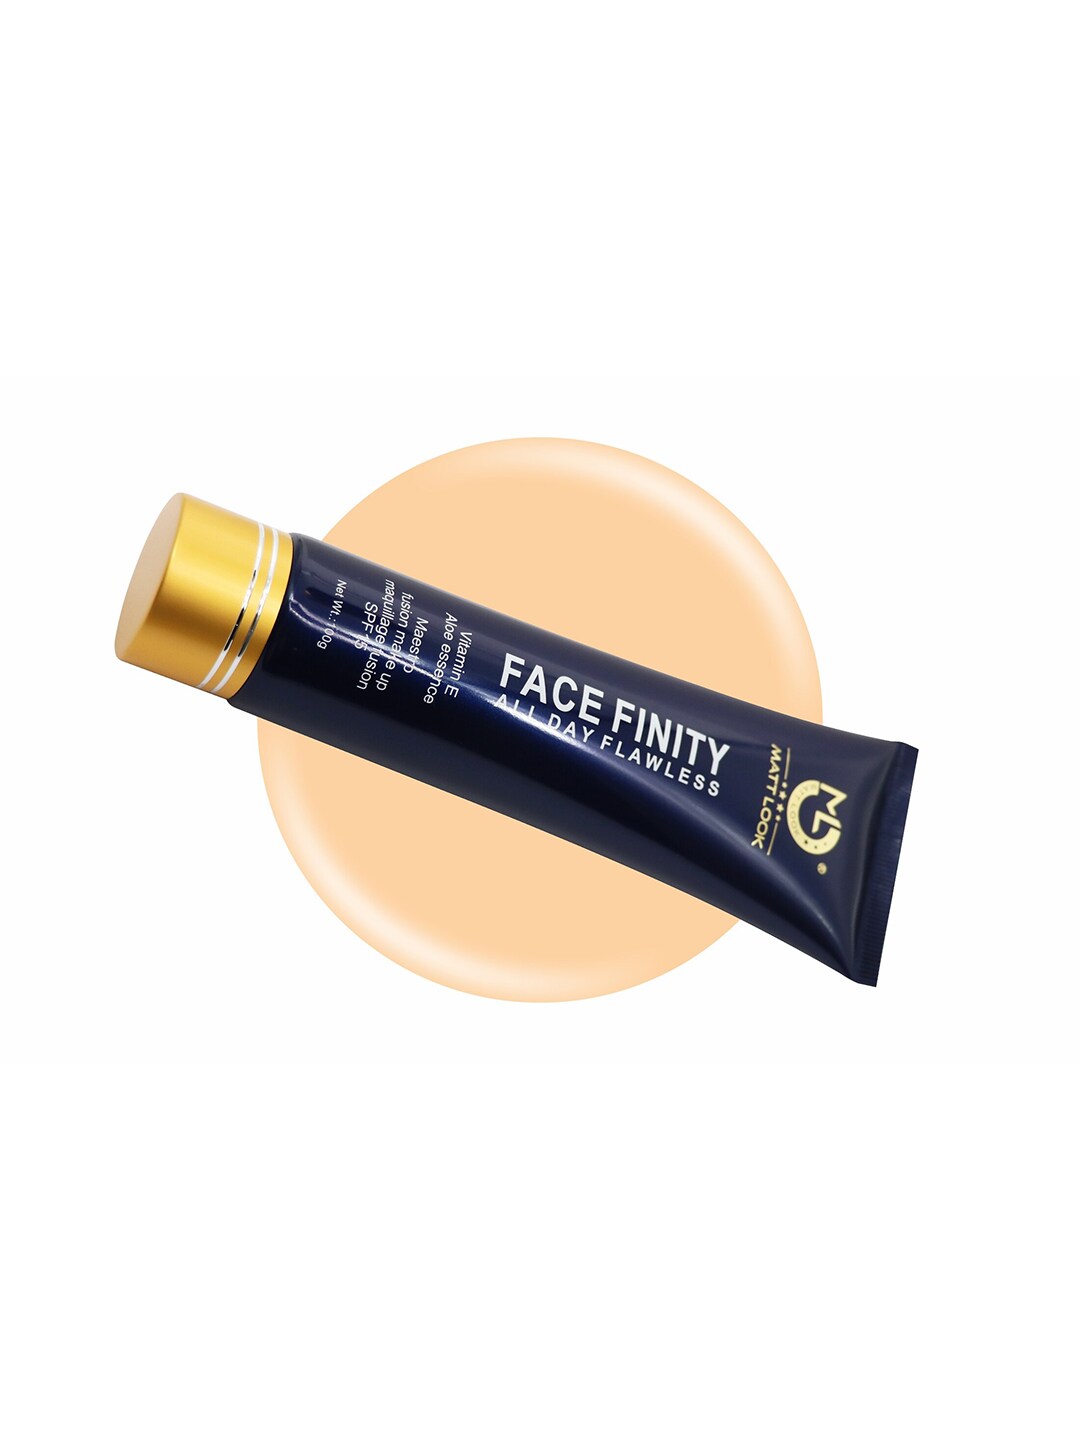 MATTLOOK Face Finity All Day Flawless Meastro Fusion Make up Foundation SPF15 - Ivory Price in India